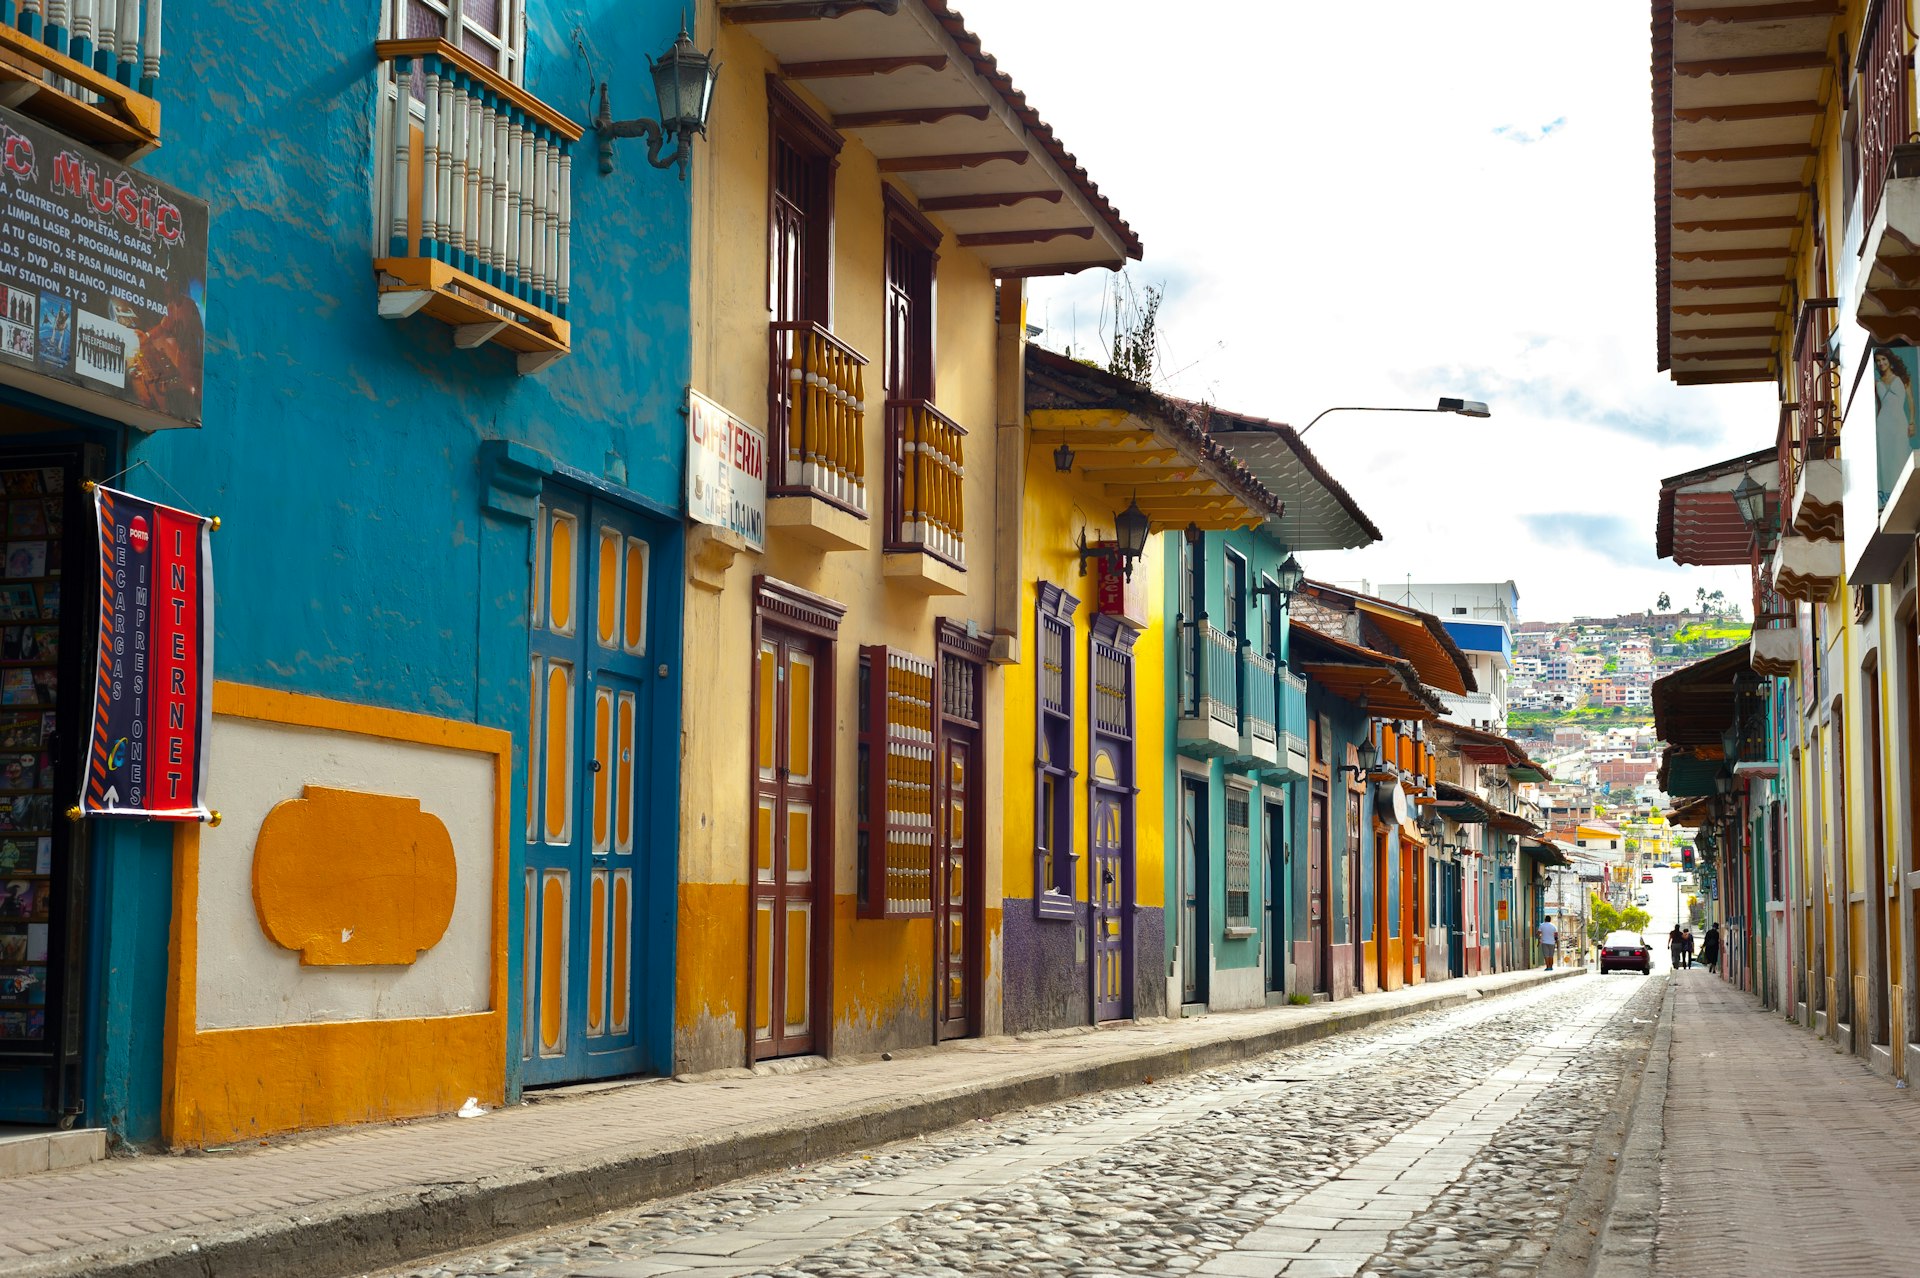 A row of brightly colored houses and shopfronts on a cobbled street